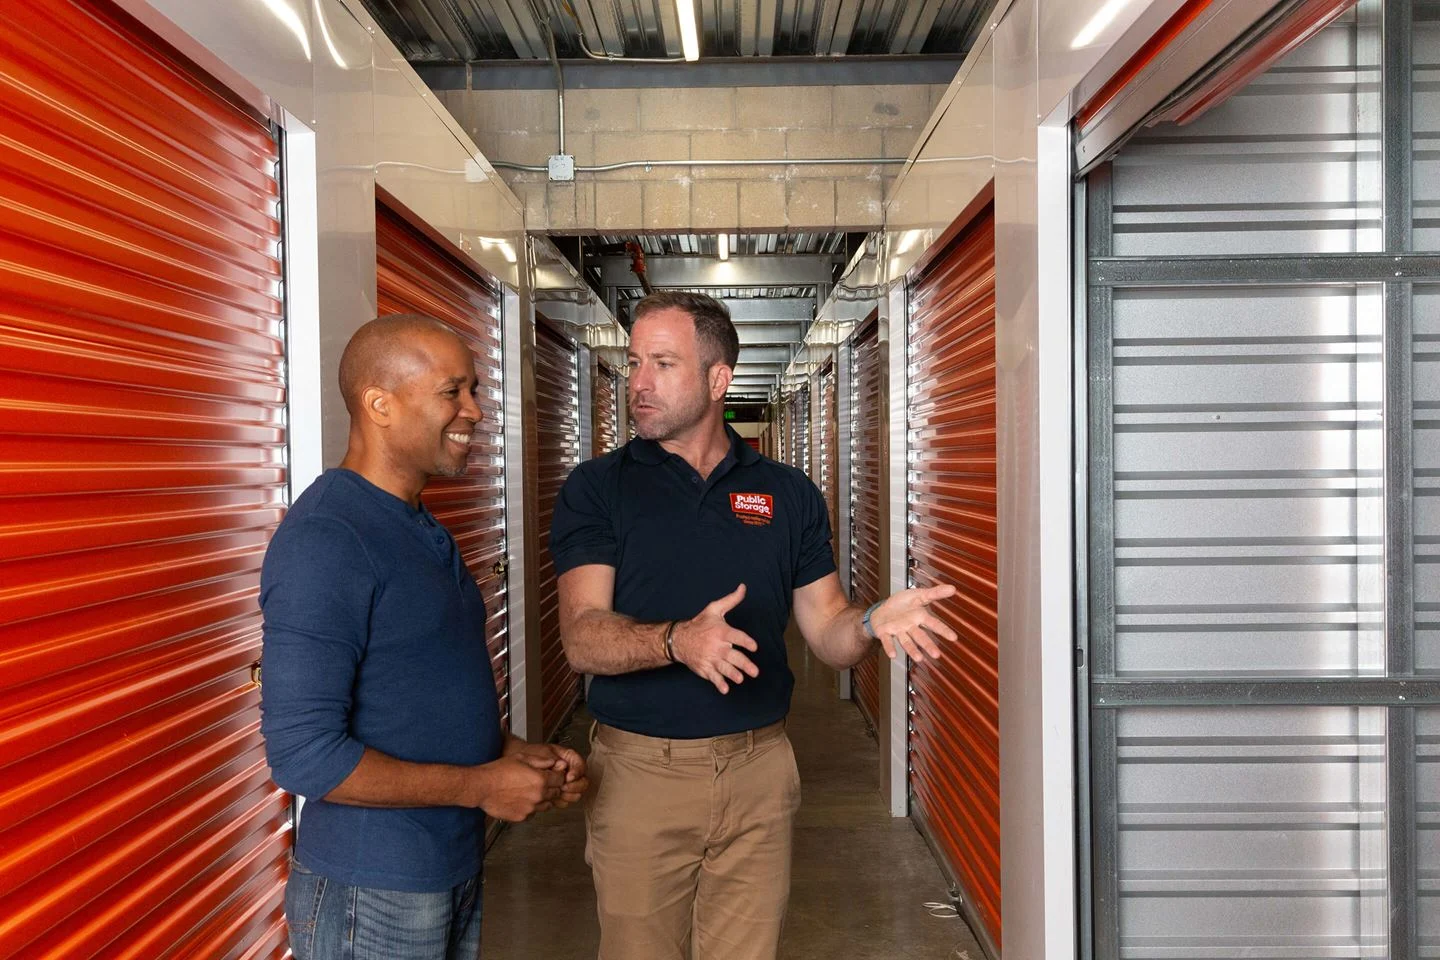 Public Storage associate giving a facility tour to a smiling customer